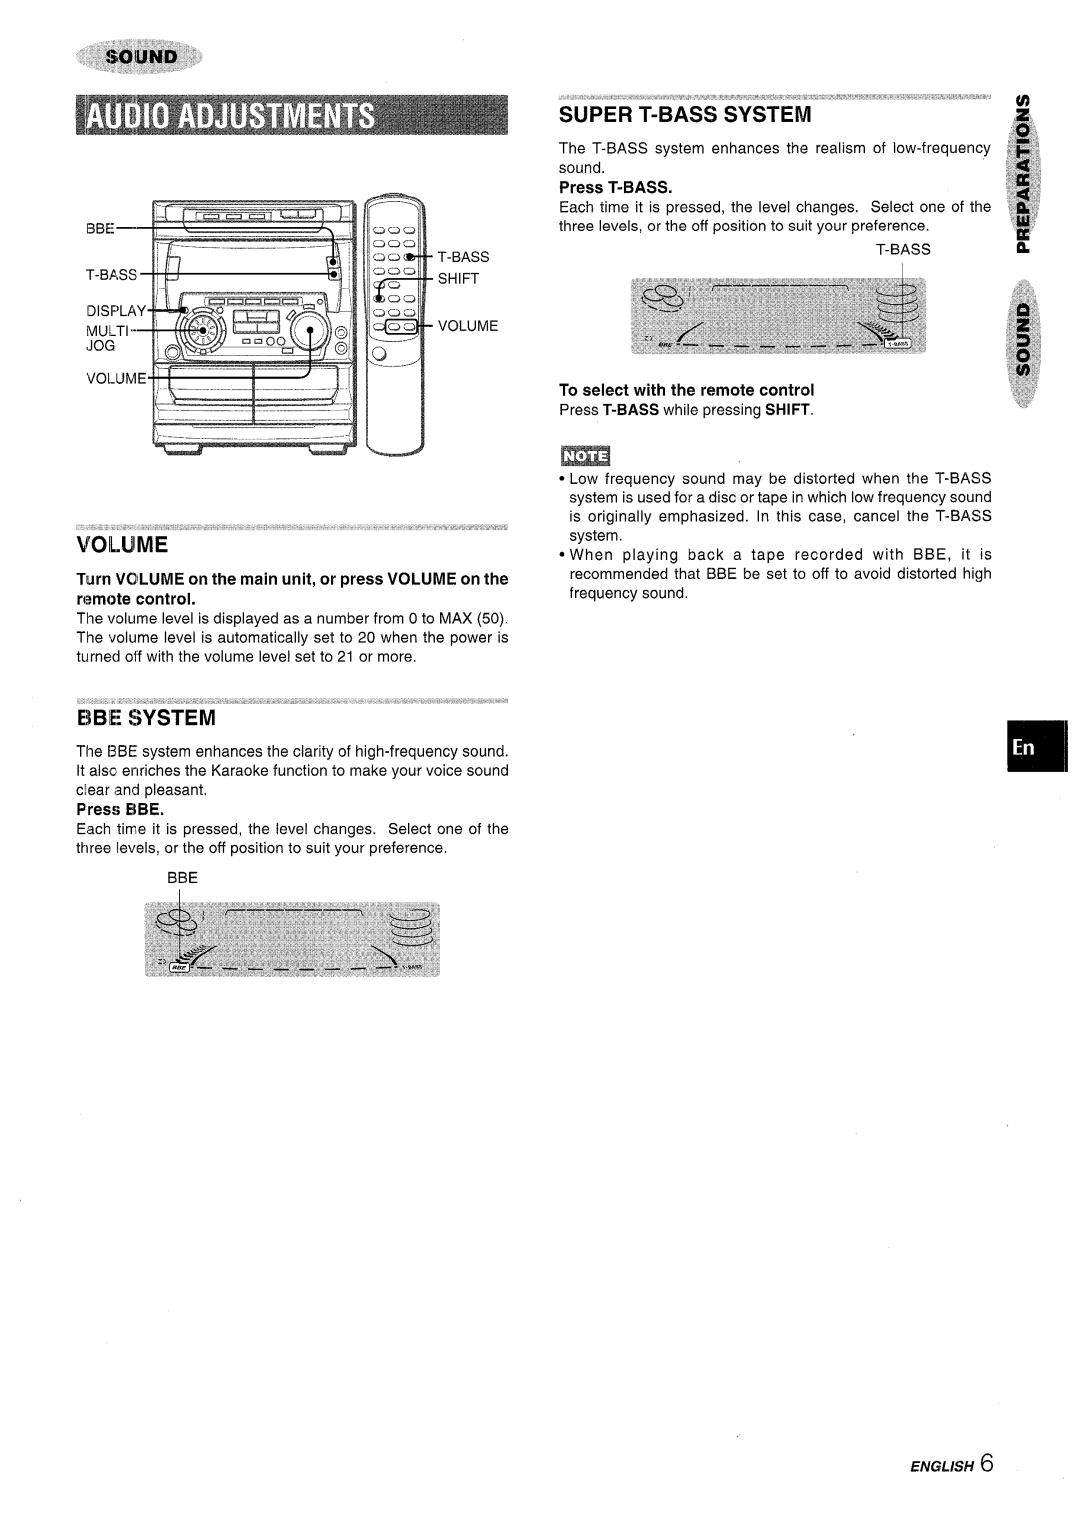 Sony NSX-A707 manual Voil.Uime, English 